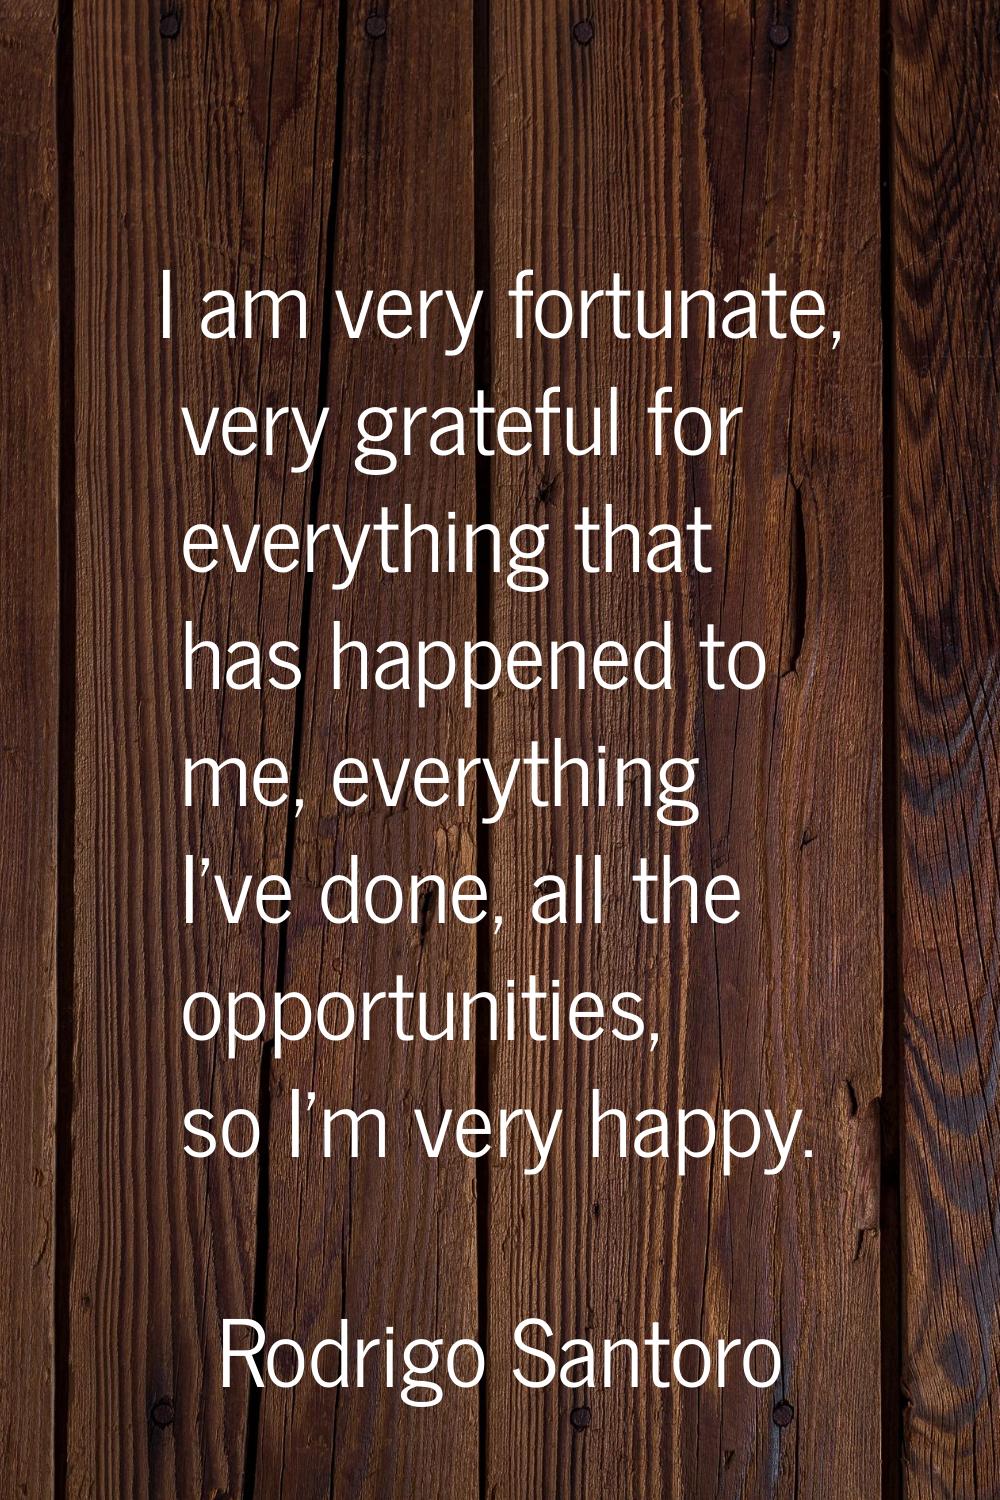 I am very fortunate, very grateful for everything that has happened to me, everything I've done, al